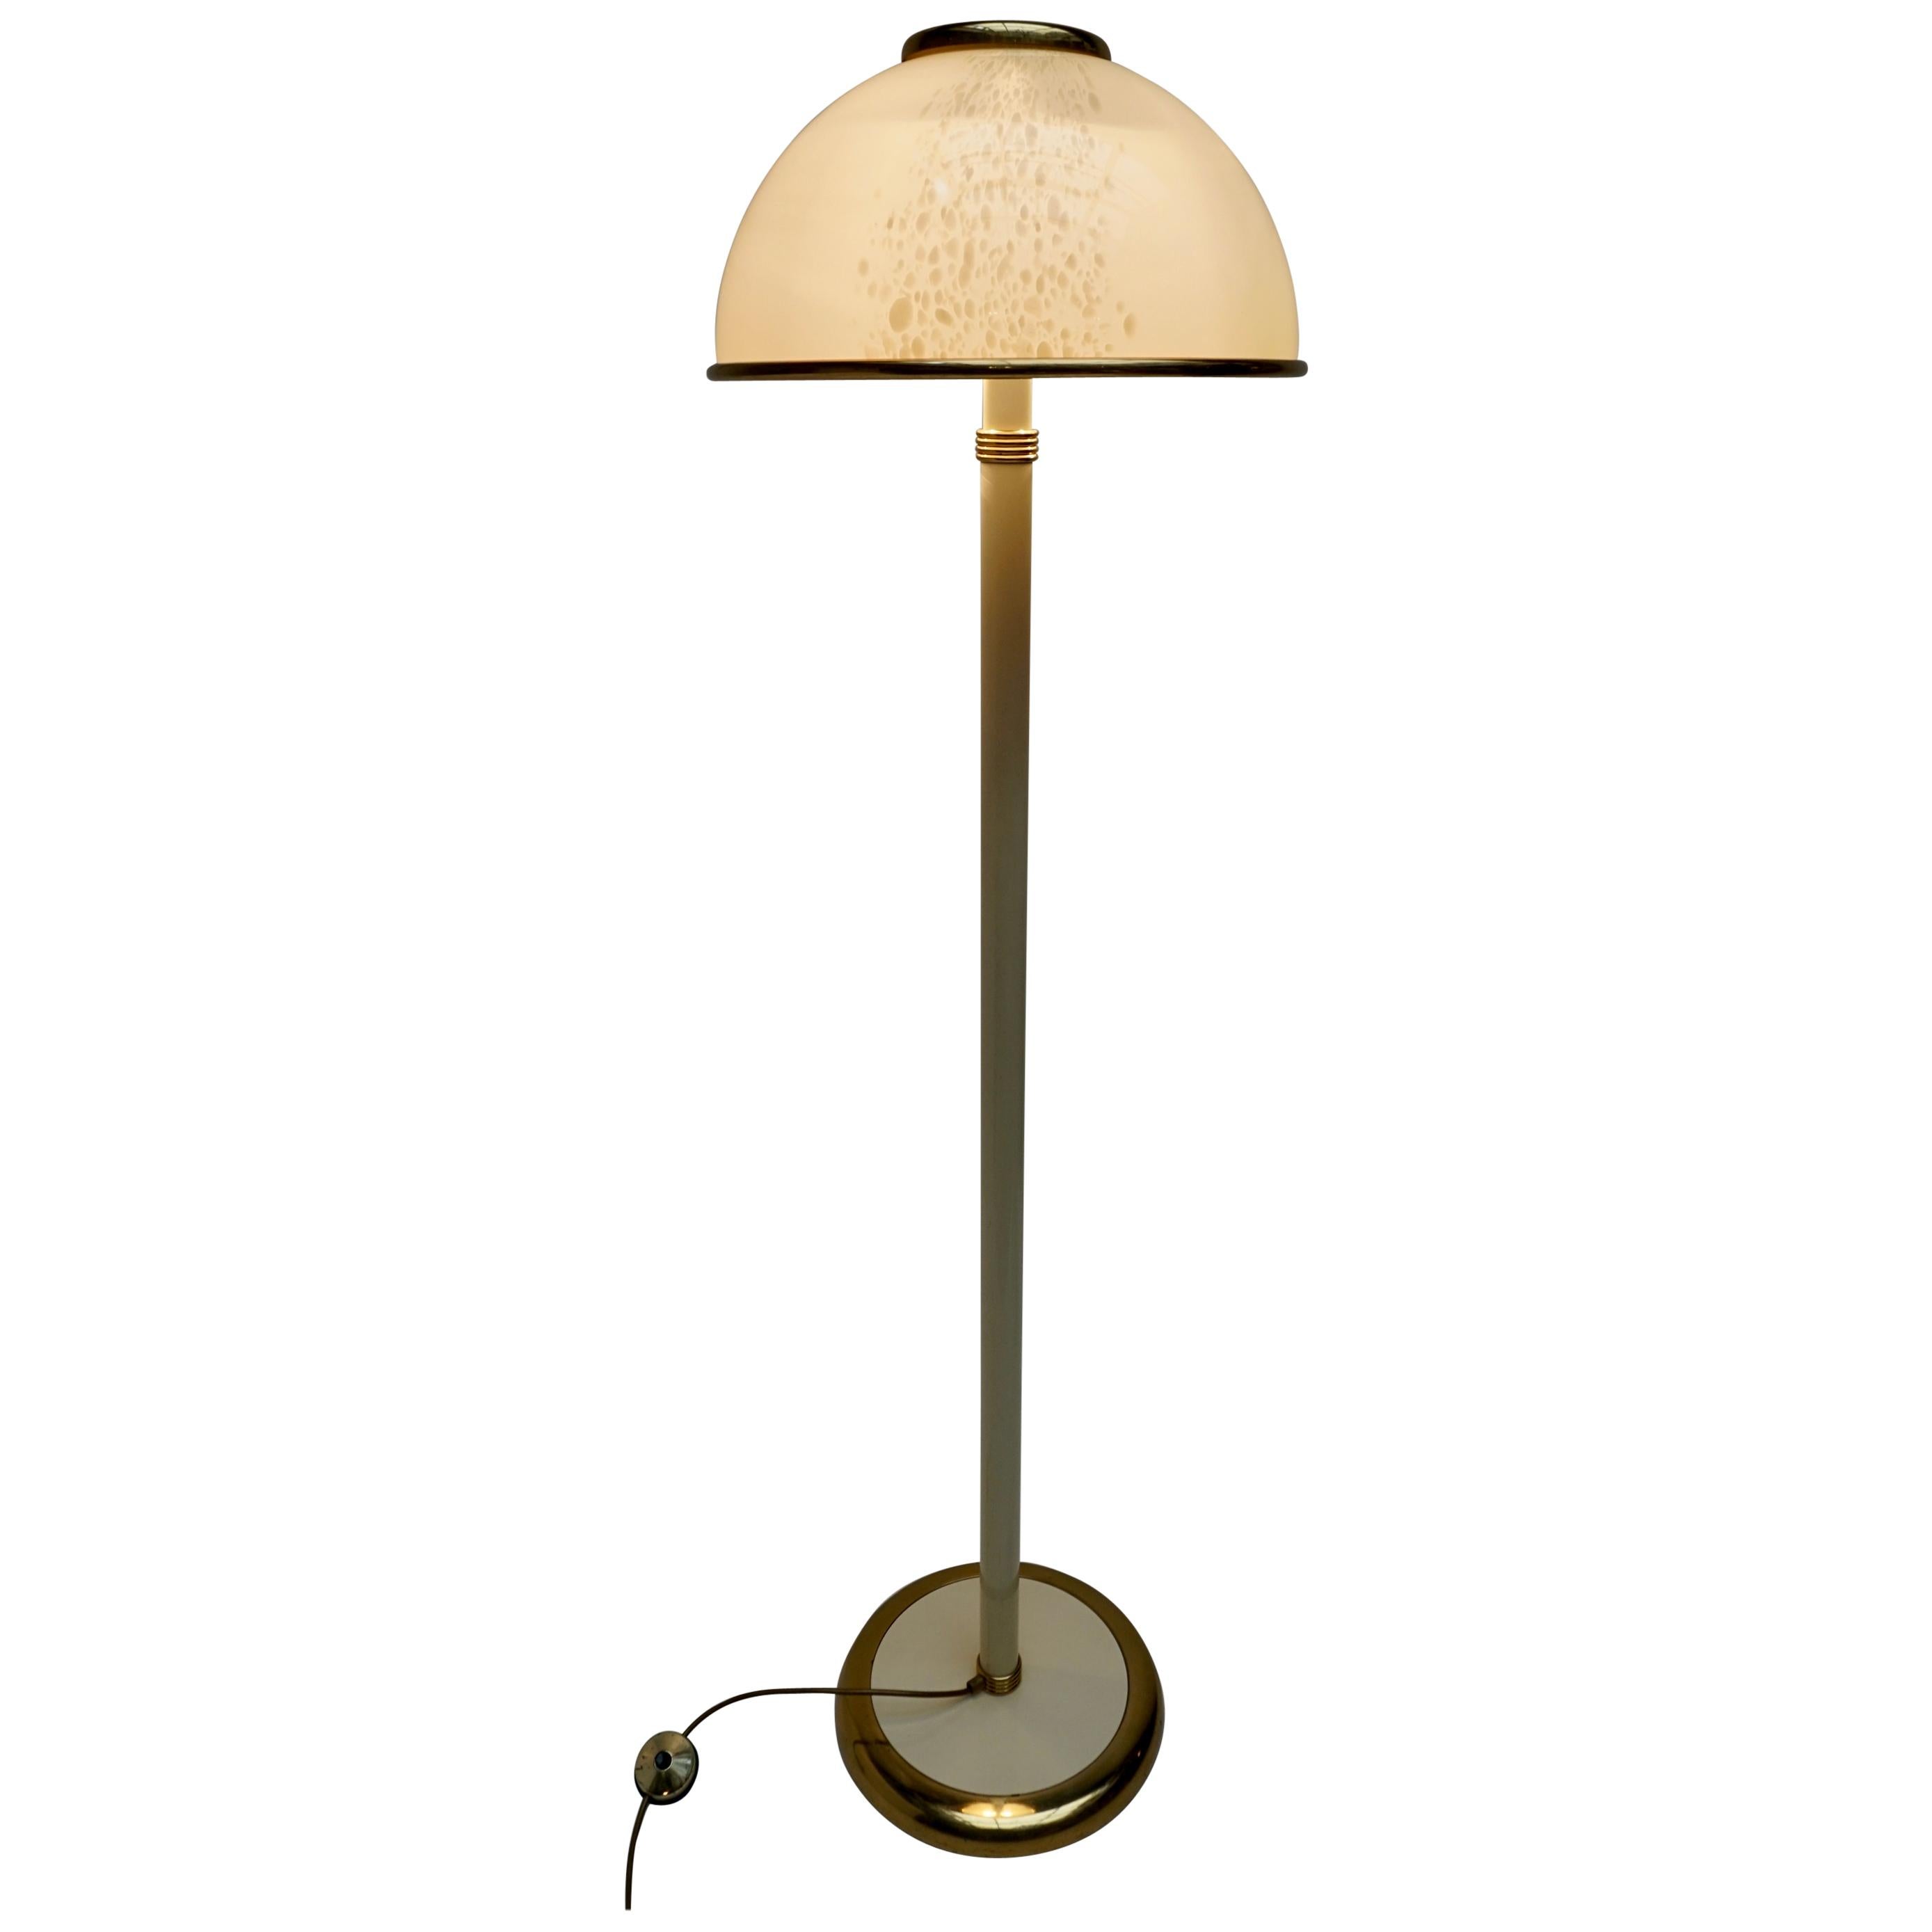 1970s Italian Floor Lamp in Brass and Artistic Murano Glass by F. Fabbian For Sale